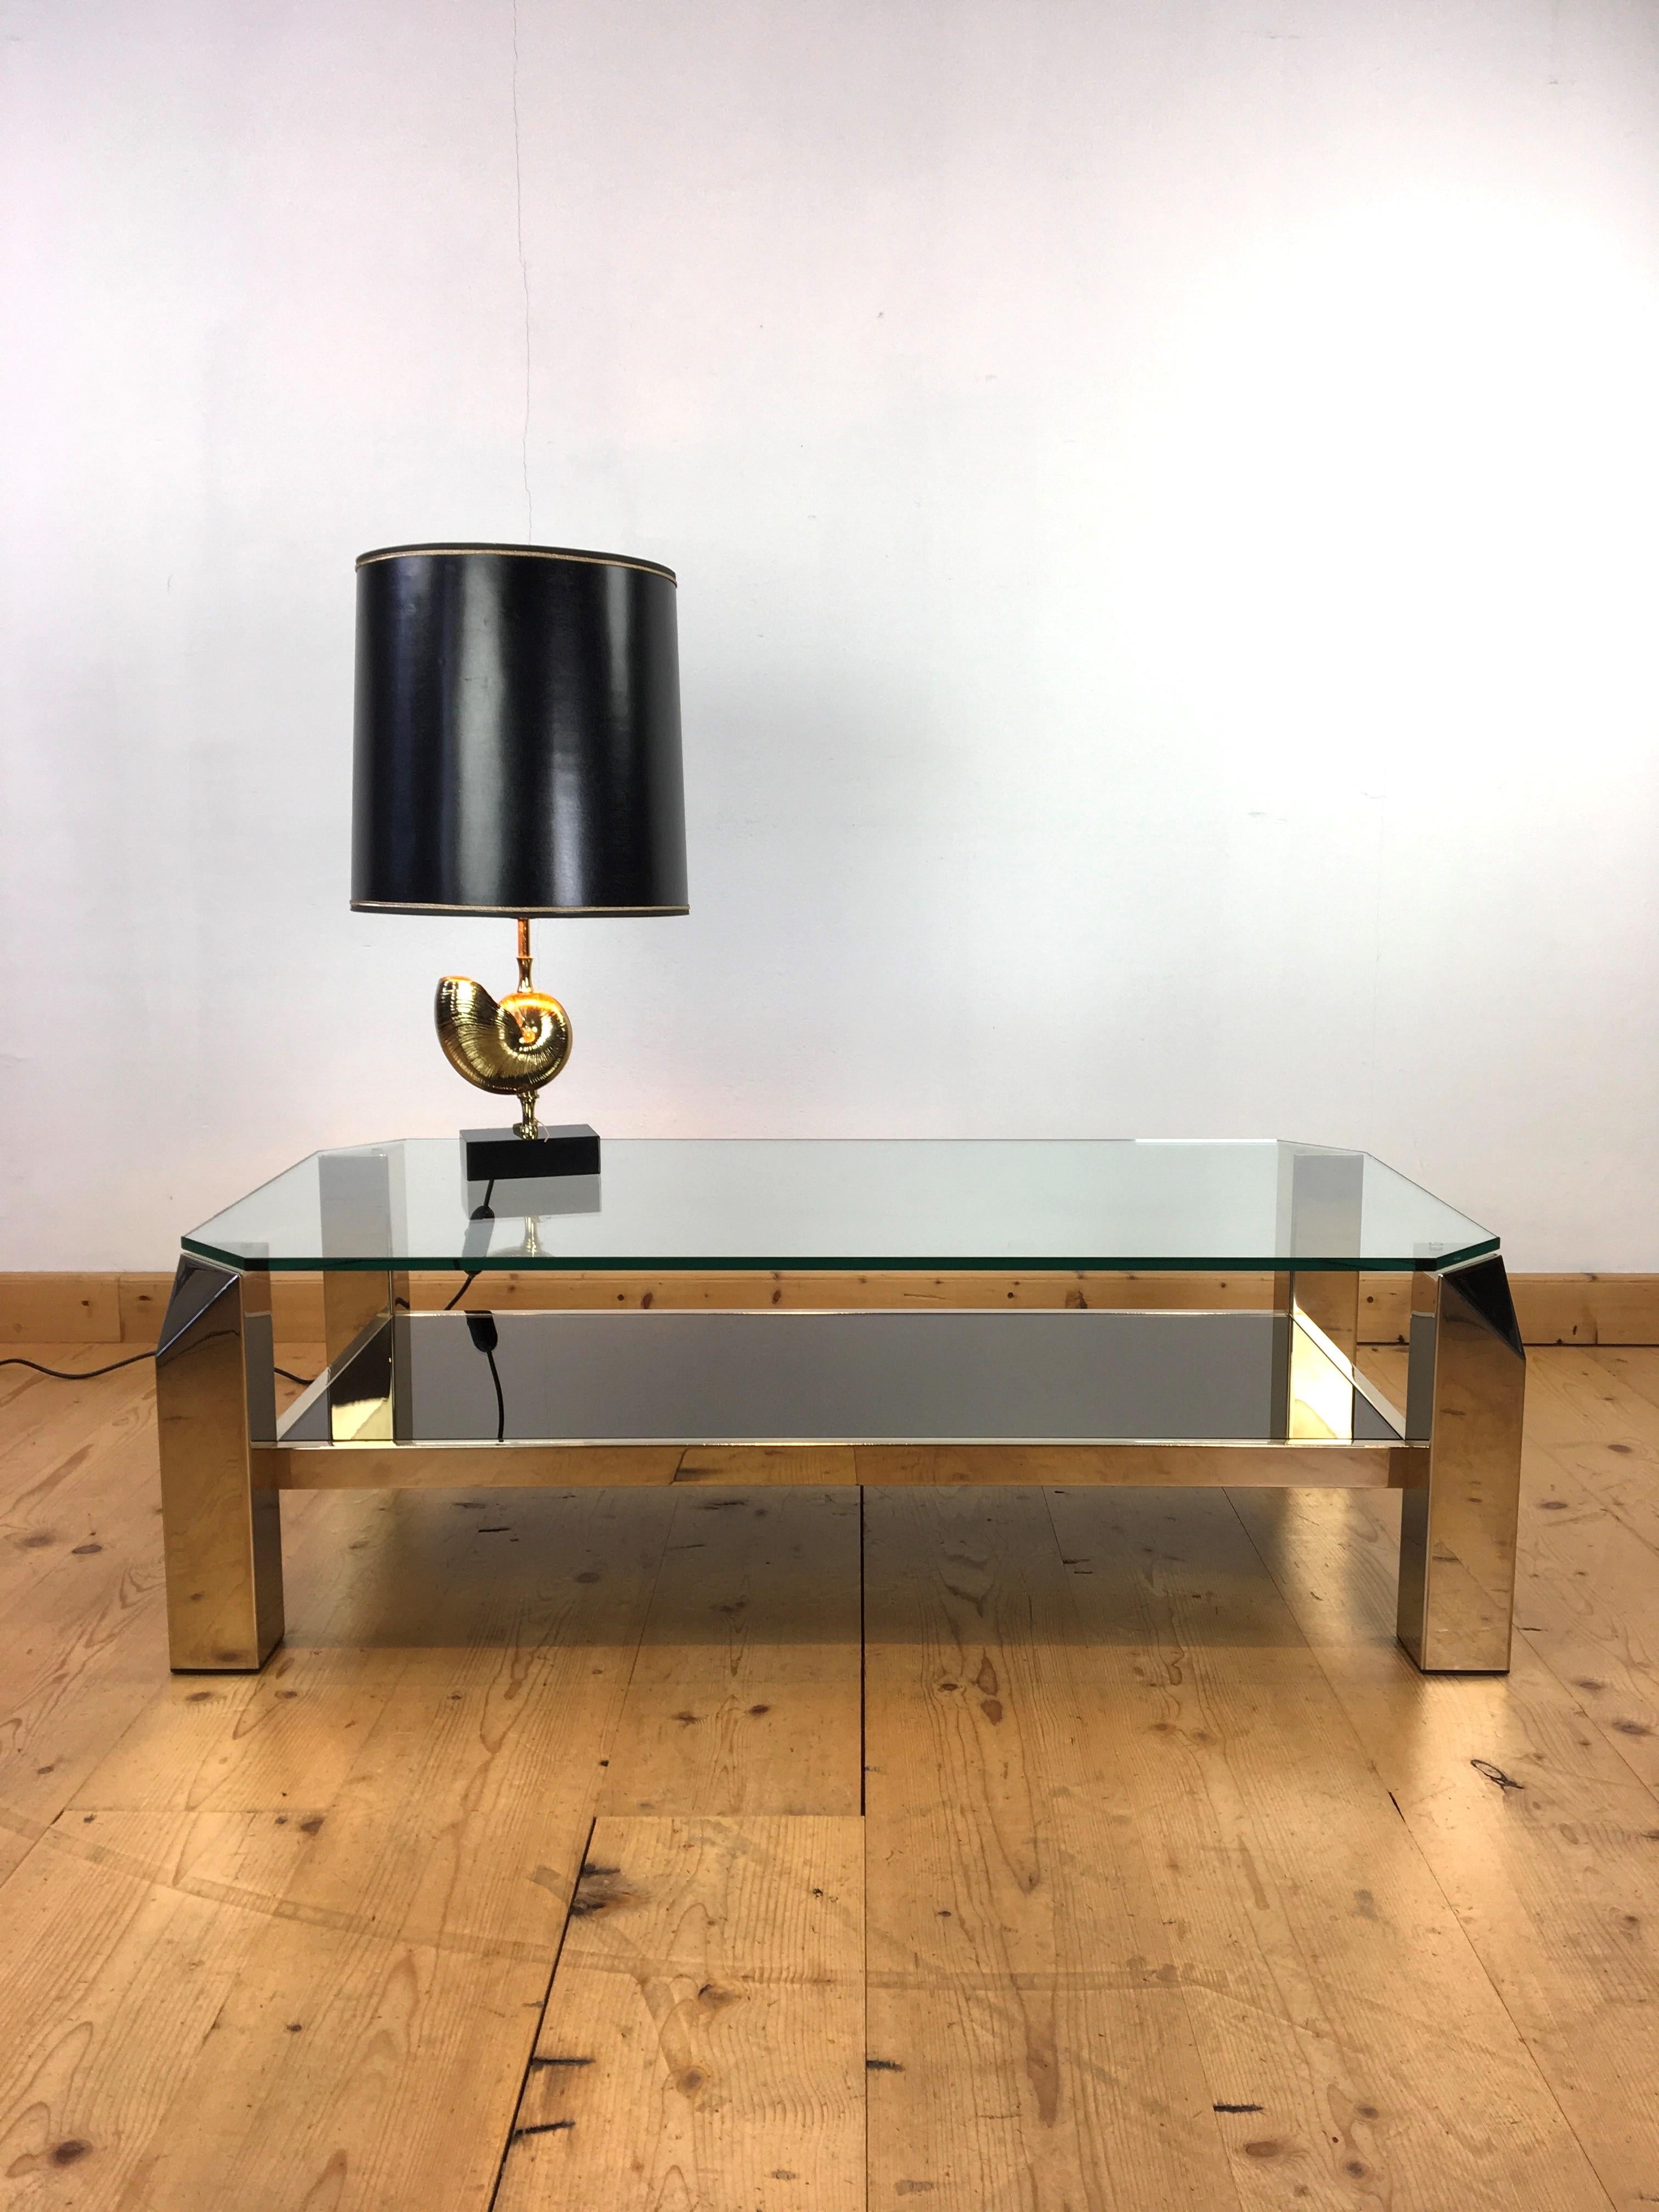 23kt Golt Plated Belgo Chrom Coffee Table, 1970s For Sale 9